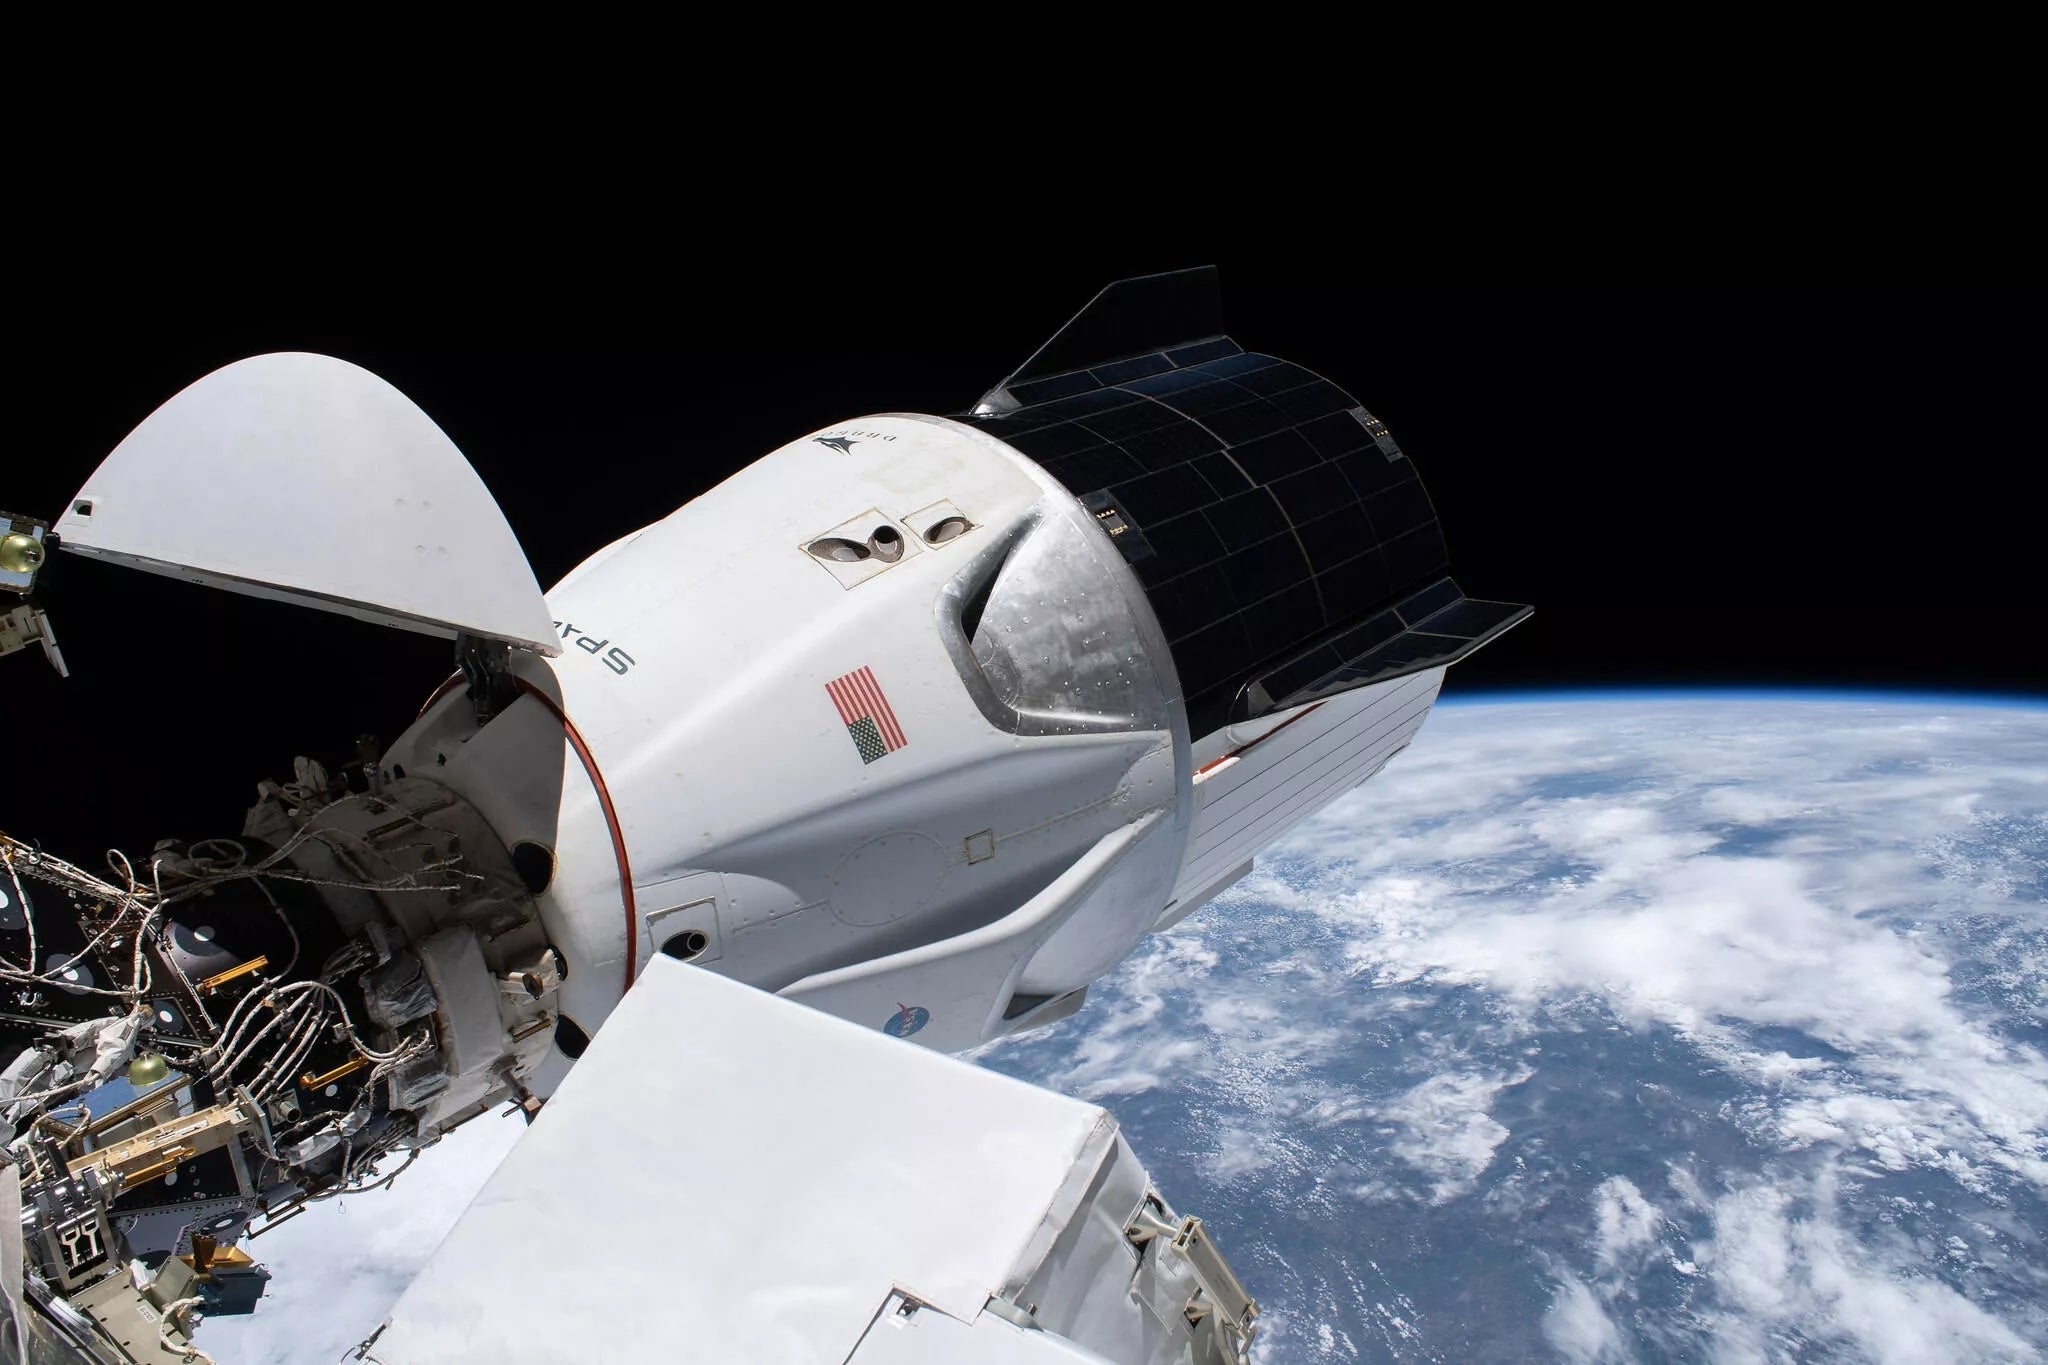 NASA Astronauts At The Space Station Will Undock & Relocate SpaceX Crew Dragon Resilience